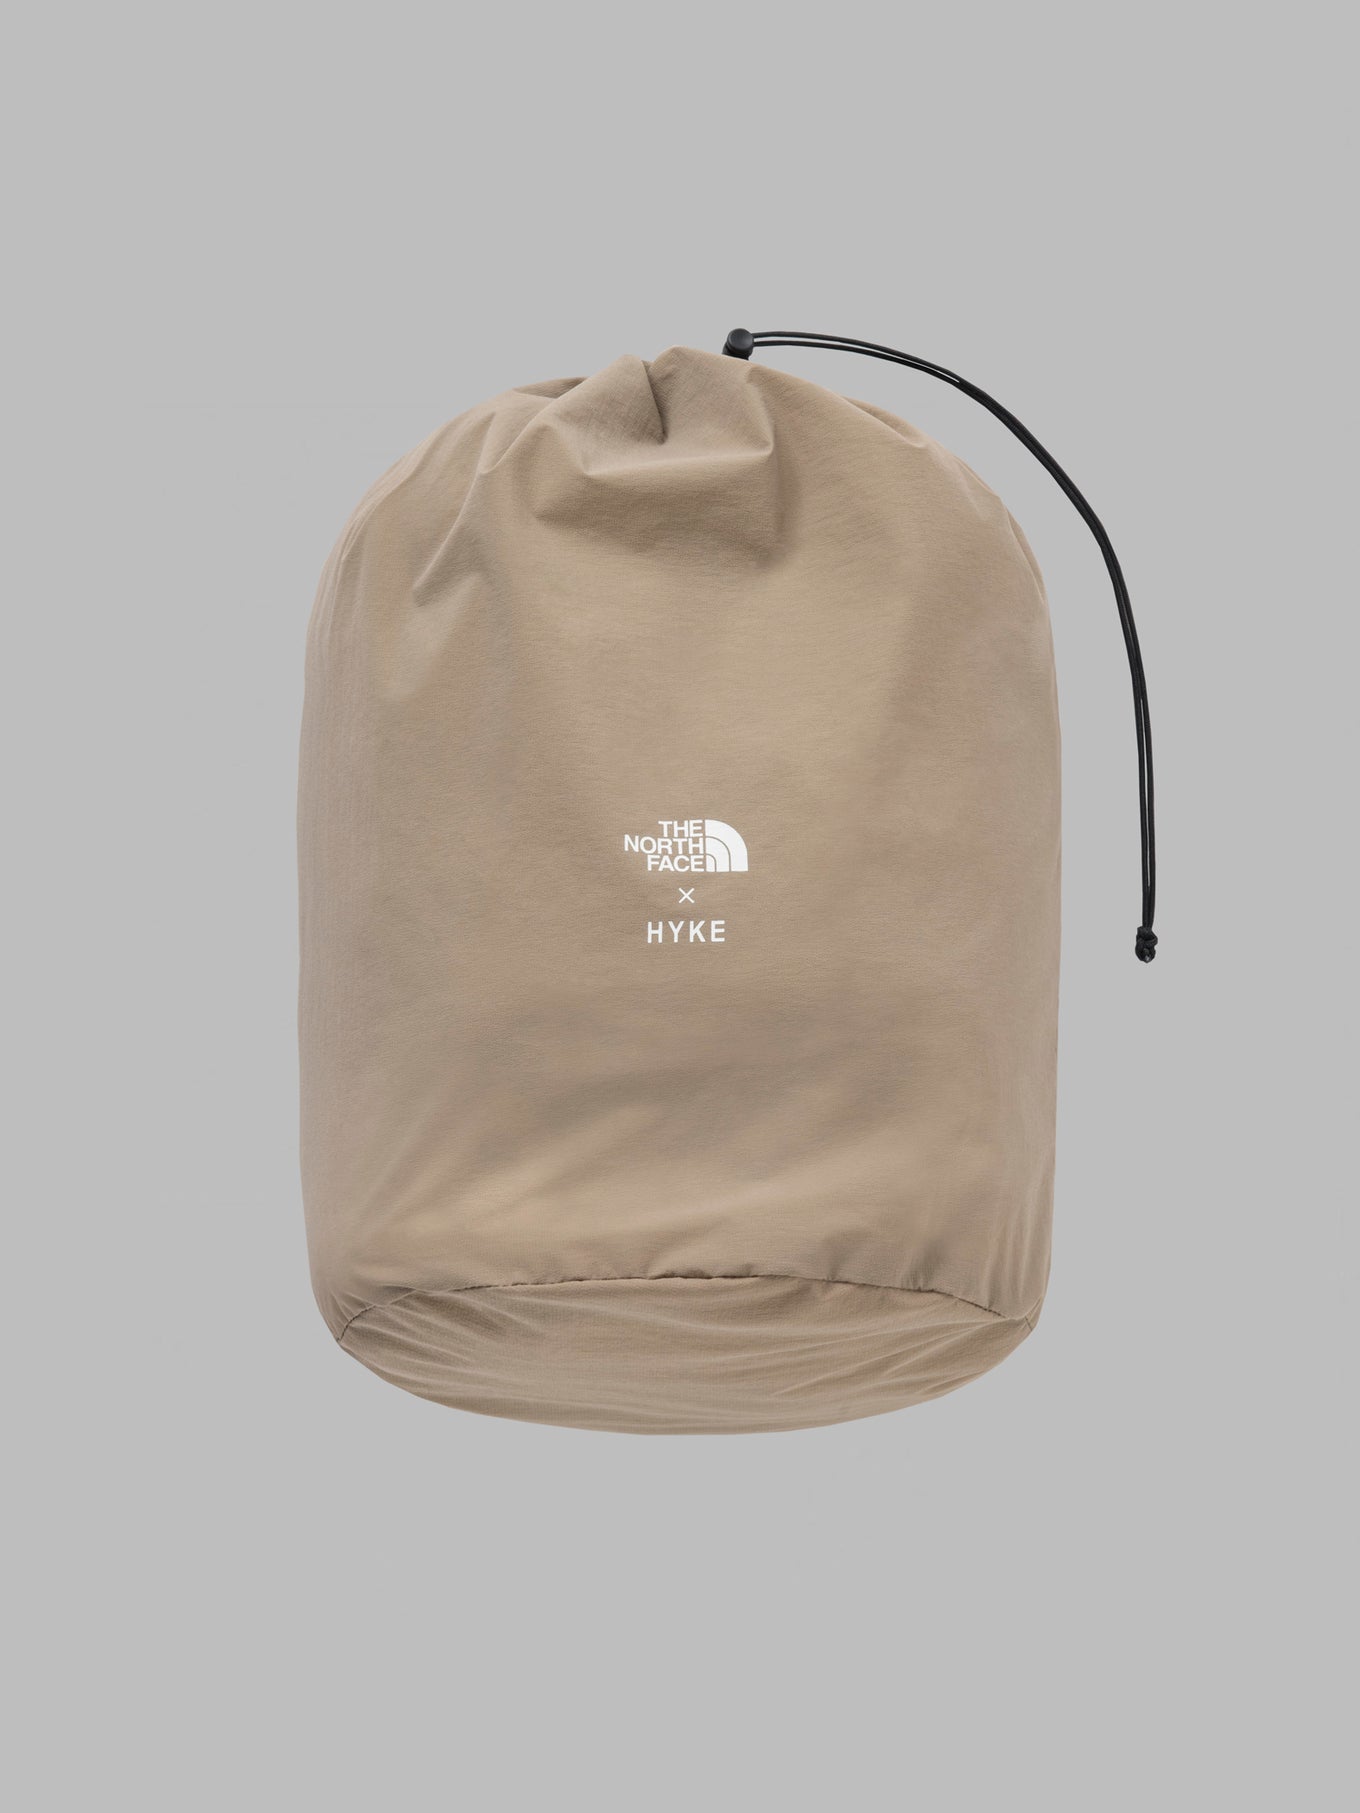 Vectiv Enduris Ⅲ HYKE Special Edition (Unisex)TNFH THE NORTH FACE ...